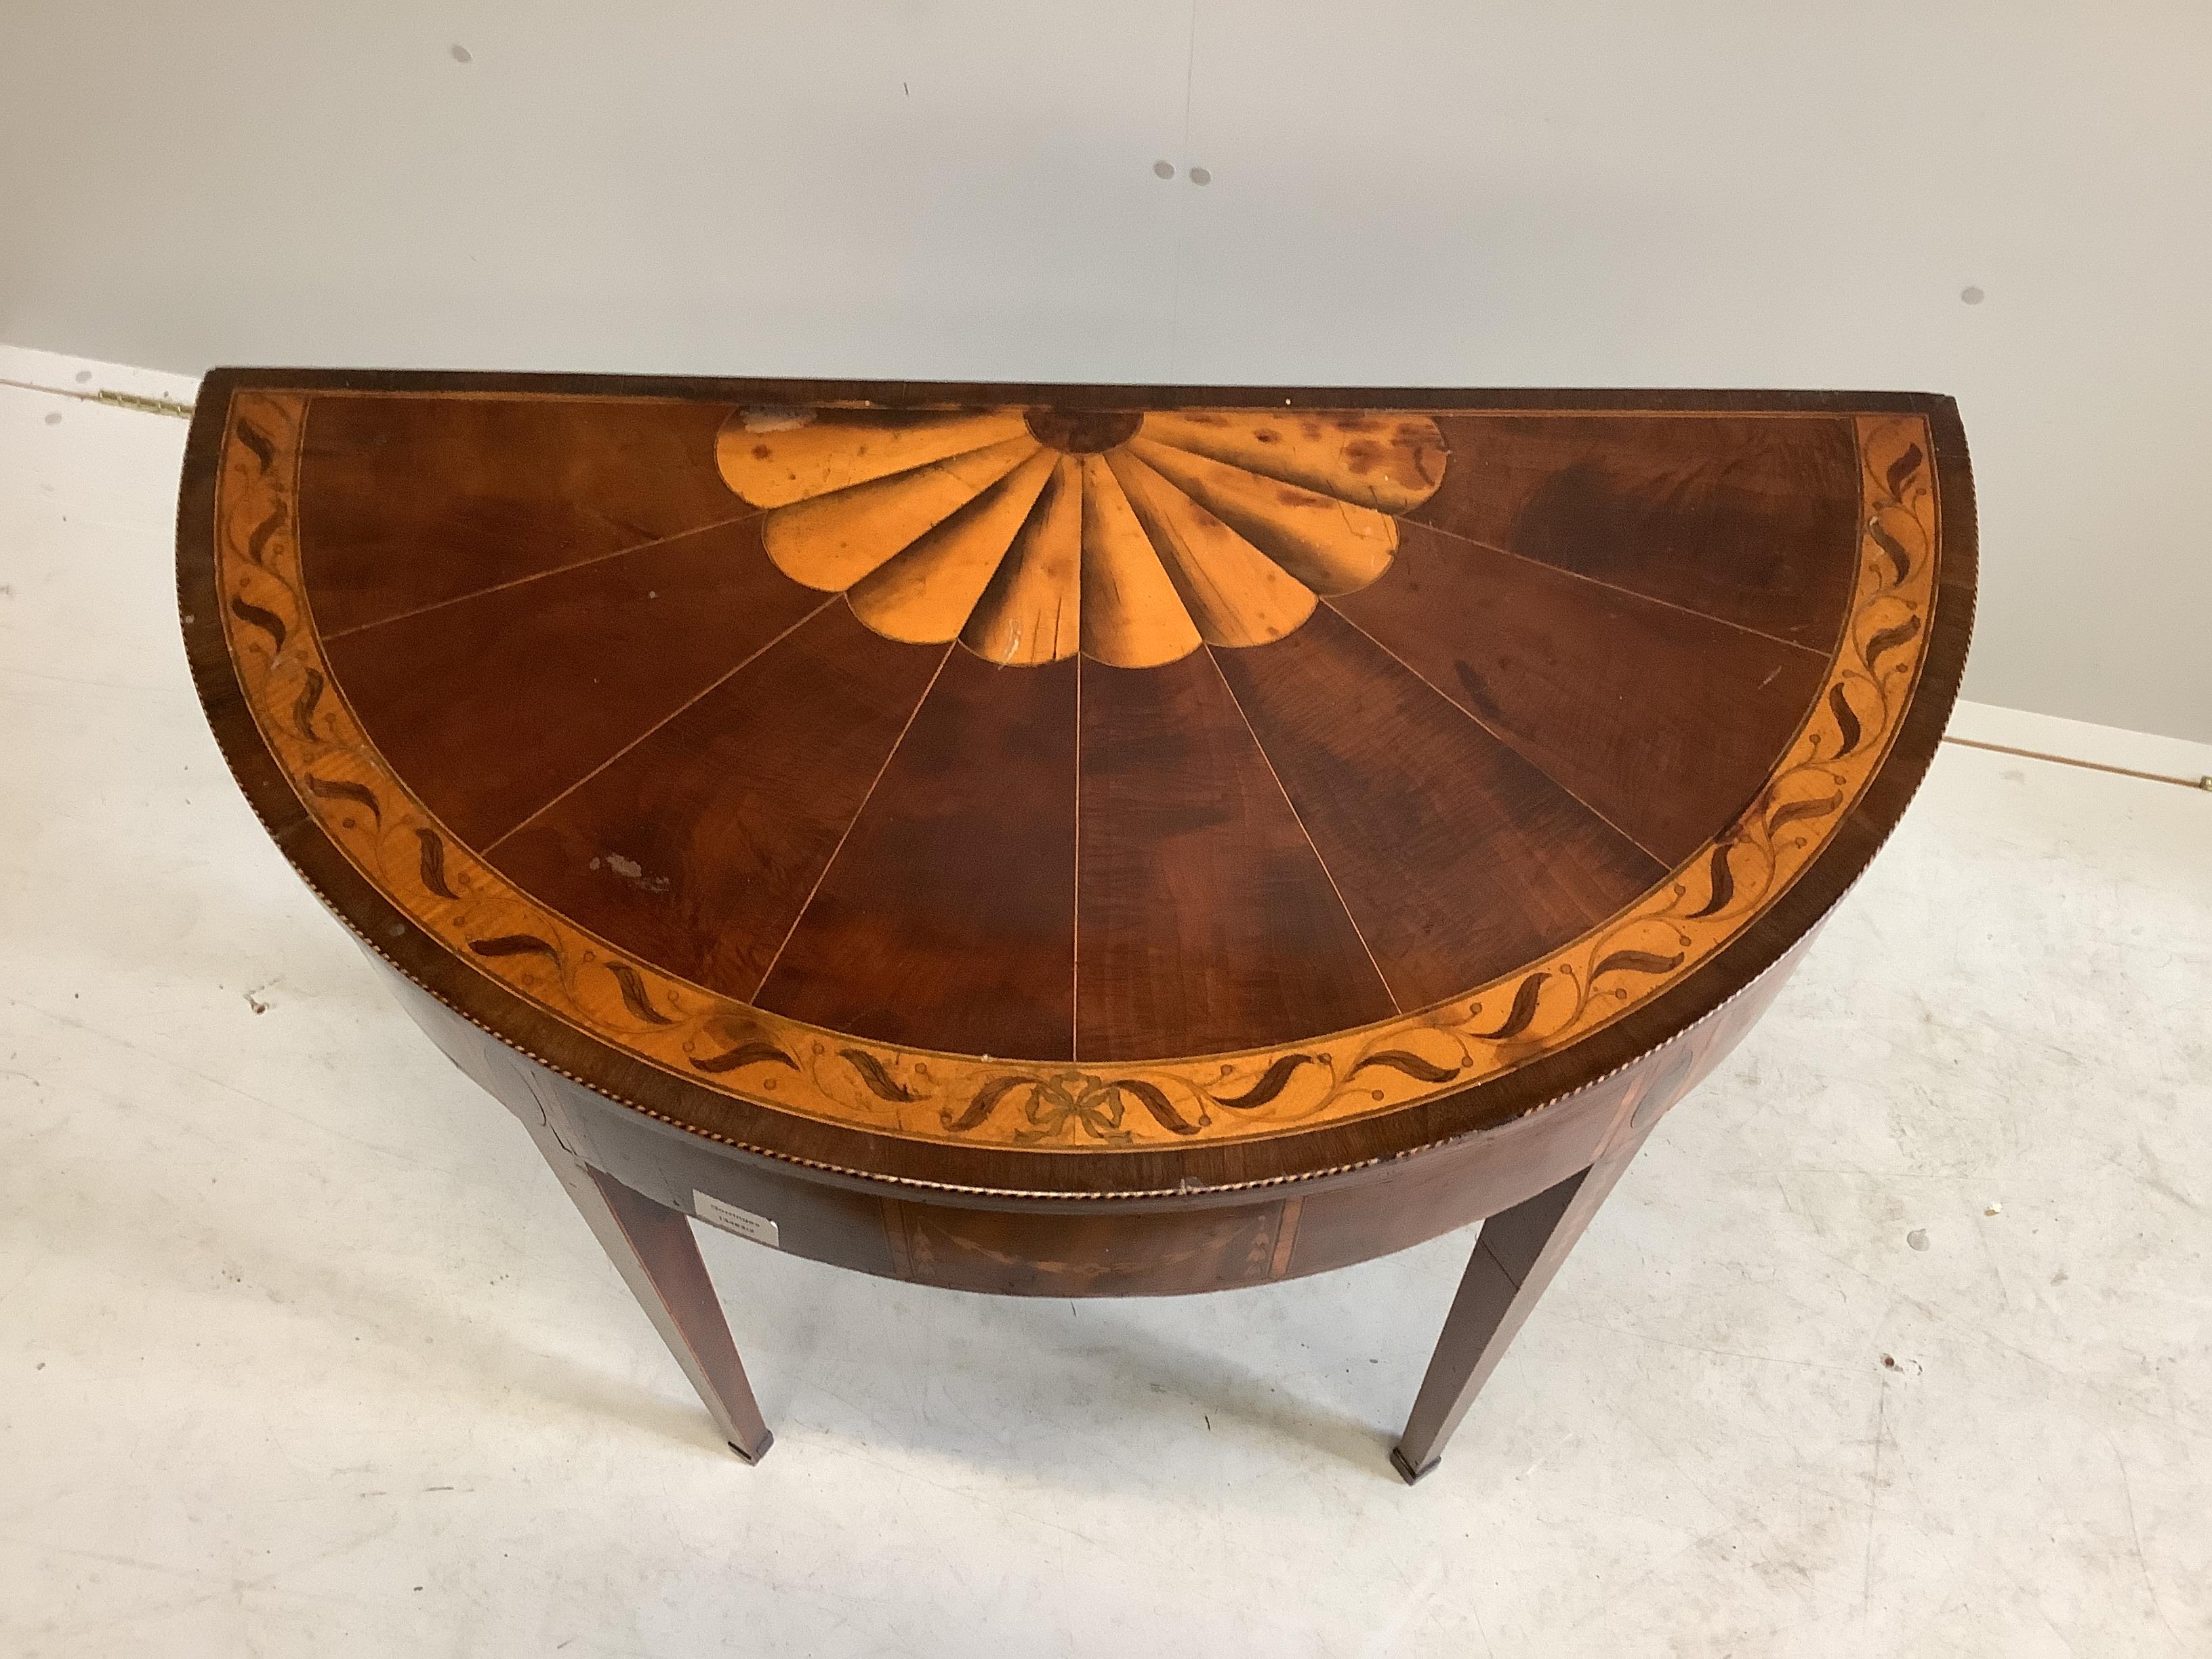 An Edwardian Sheraton Revival inlaid mahogany and marquetry D shaped card table, width 89cm, depth 44cm, height 75cm